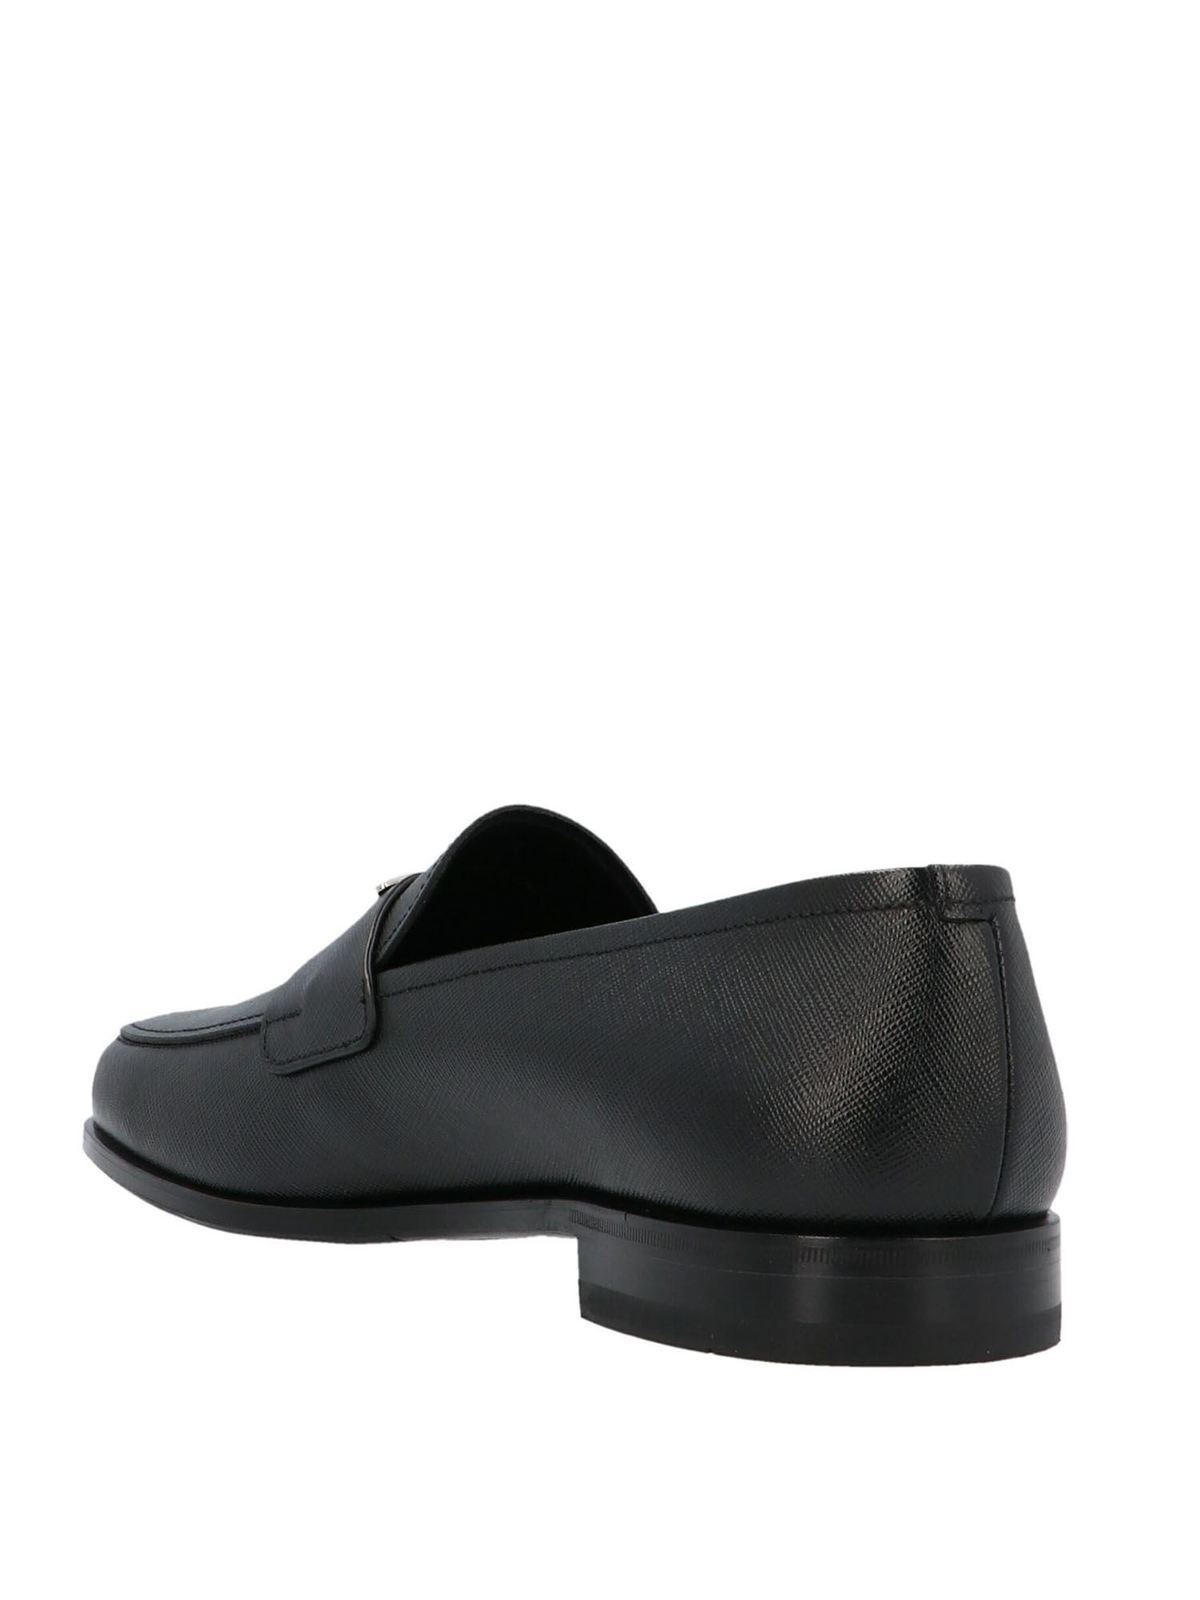 Loafers & Slippers Prada - Triangle logo loafers in black - 2DB180053F0002